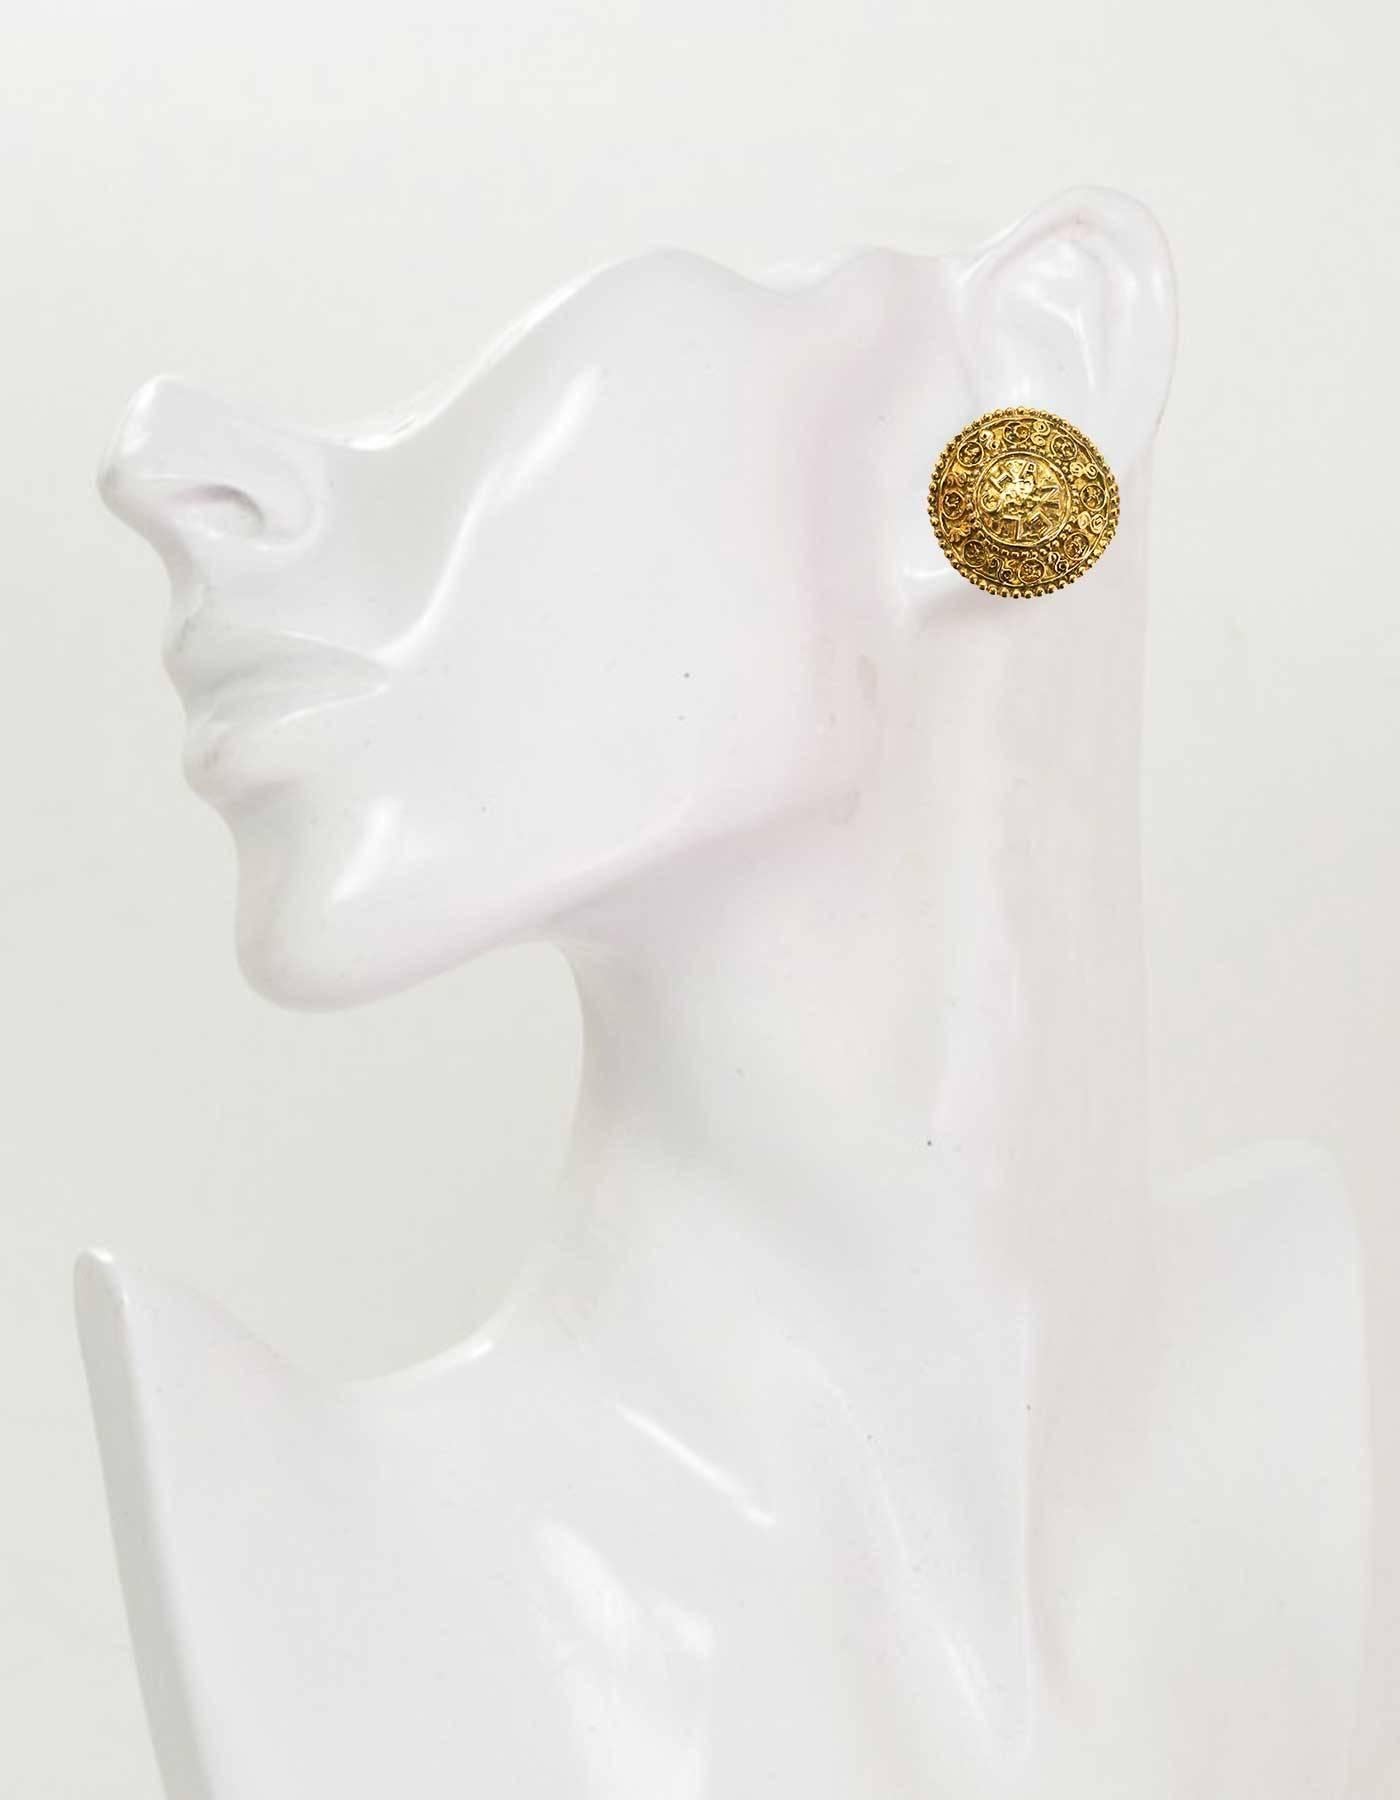 Chanel Vintage Medallion Clip-On Earrings

Made In: France
Year Of Production: Early 1990's
Color: Goldtone
Materials: Metal
Closure: Clip on
Stamp: Chanel C C Made in France
Overall Condition: Excellent vintage, pre-owned condition with minor